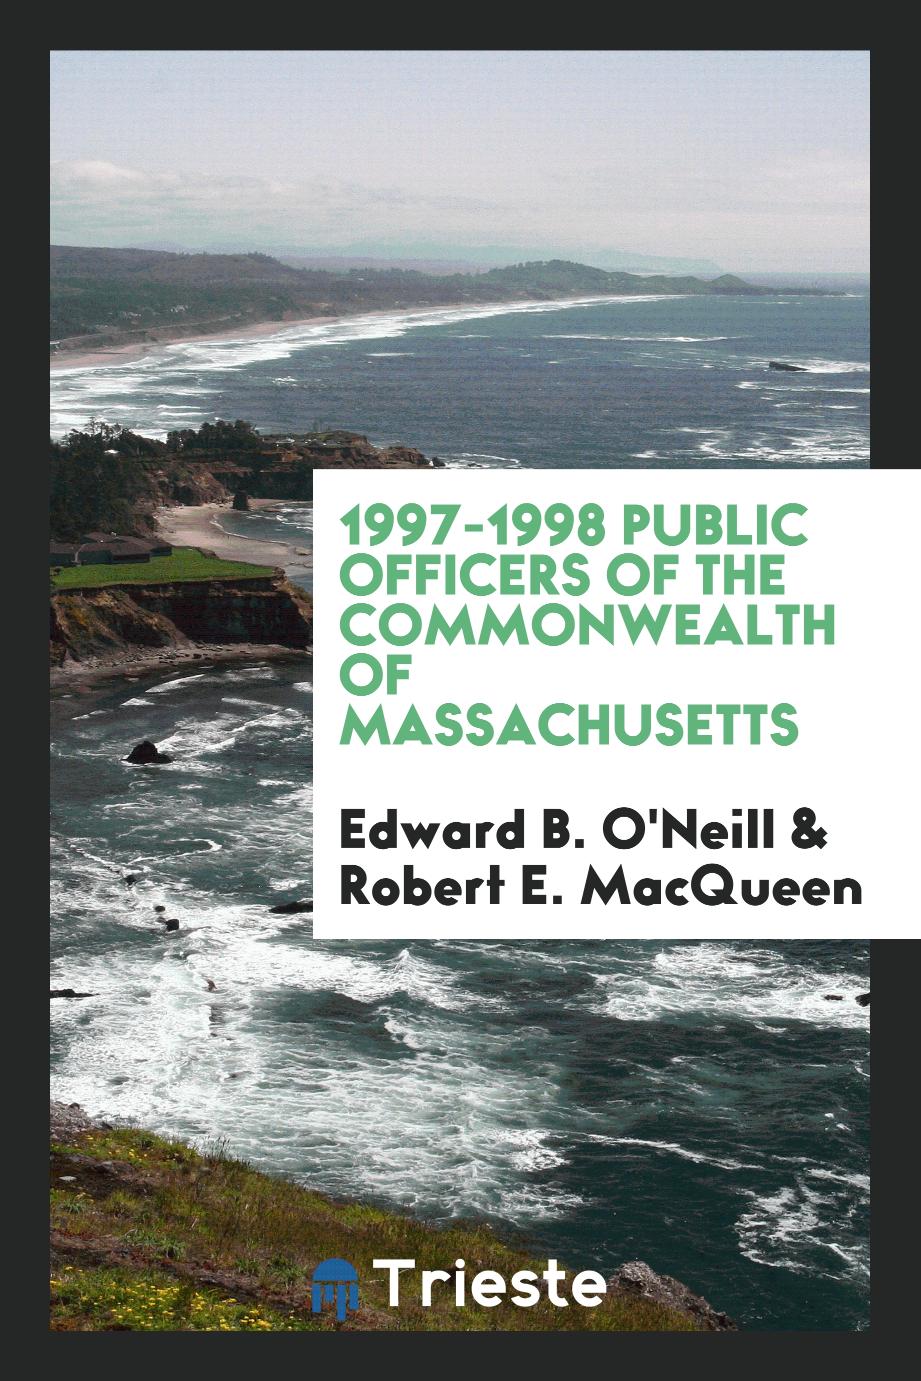 1997-1998 public officers of the Commonwealth of Massachusetts